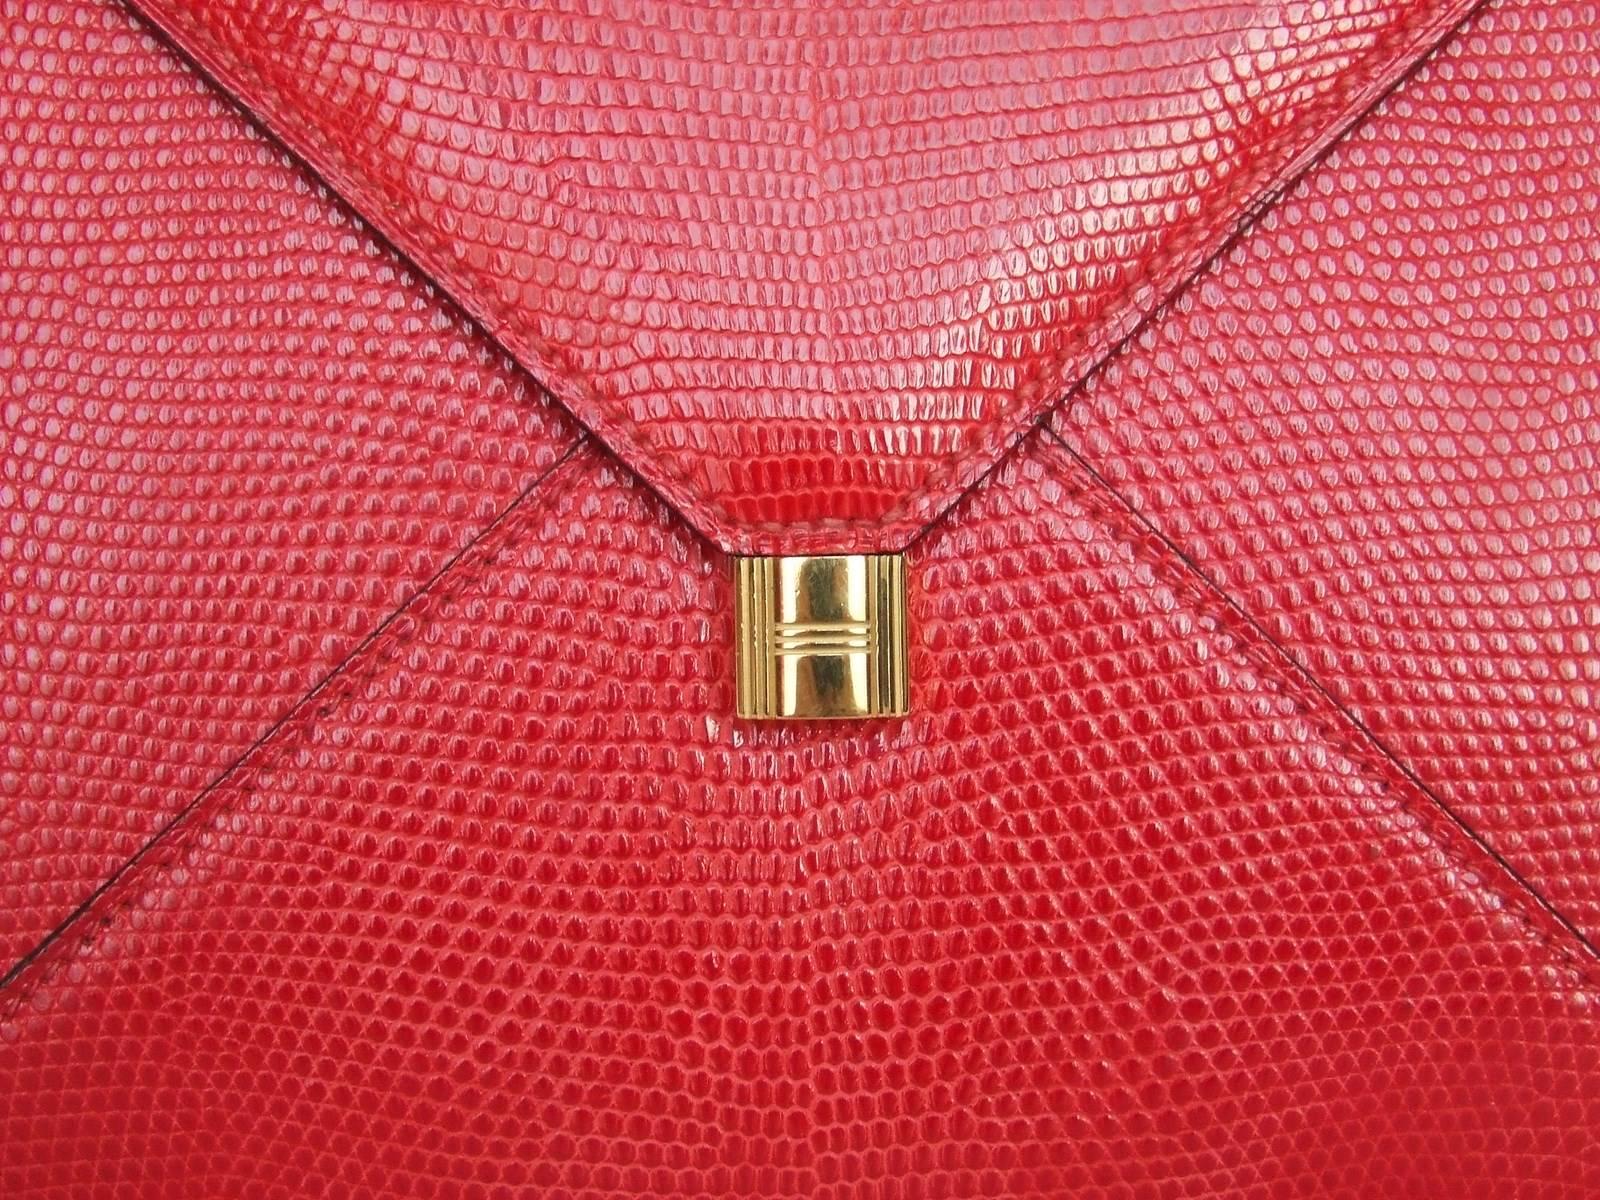 EXCEPTIONAL and RARE Authentic Vintage Hermes Bag

Called 